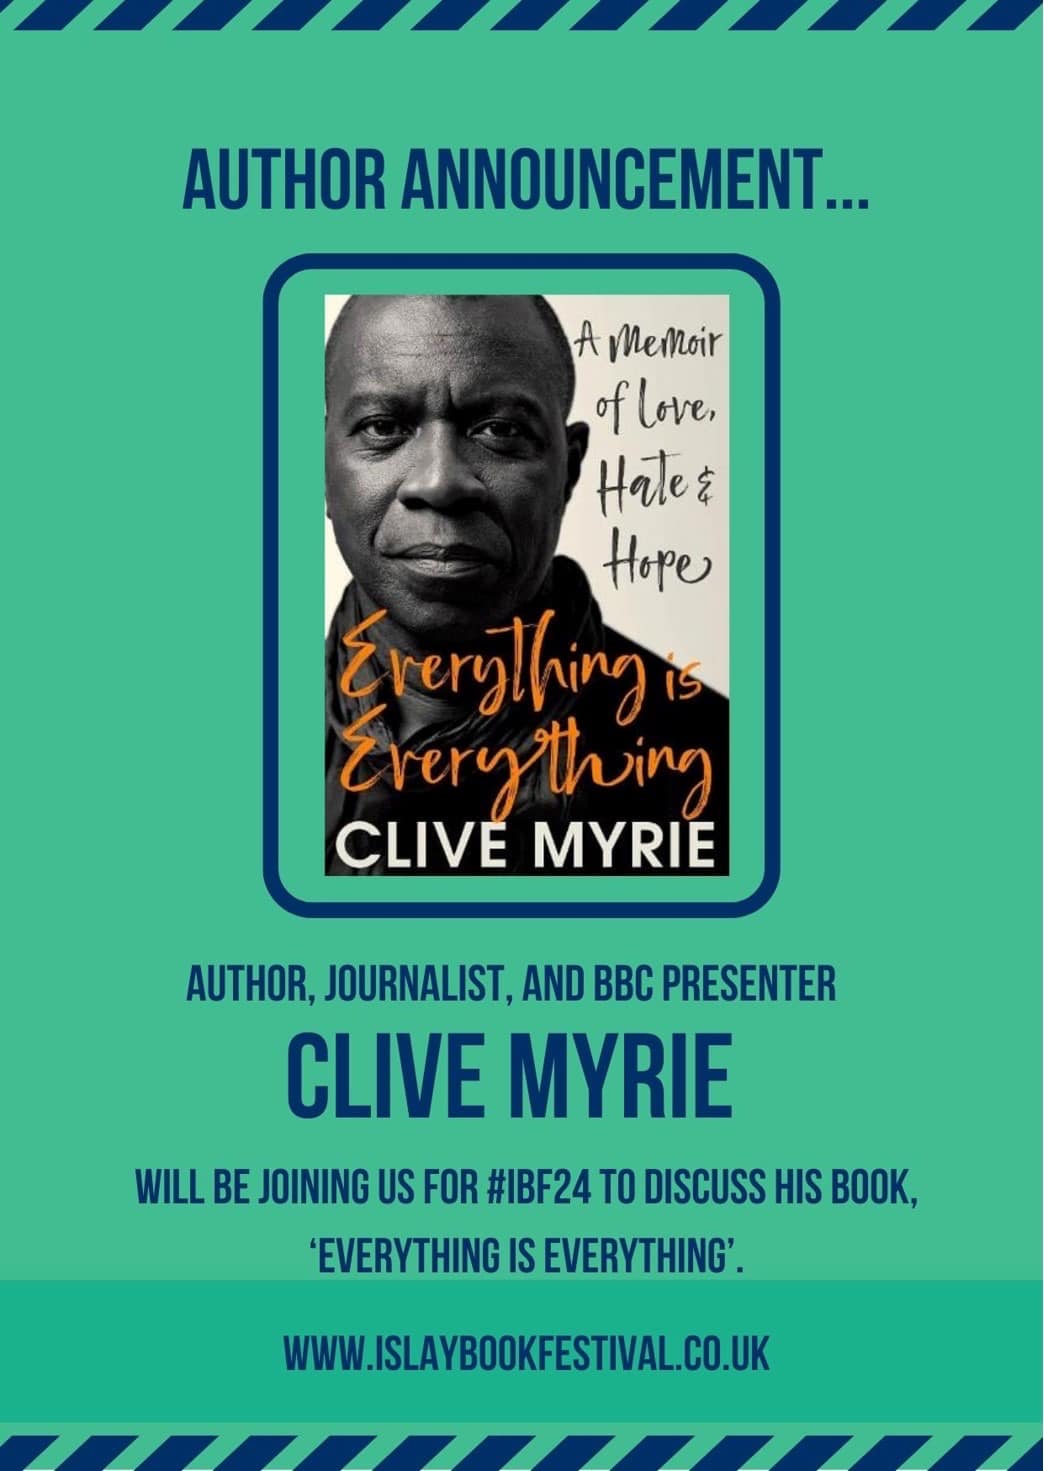 Clive Myrie to appear at IBF24!